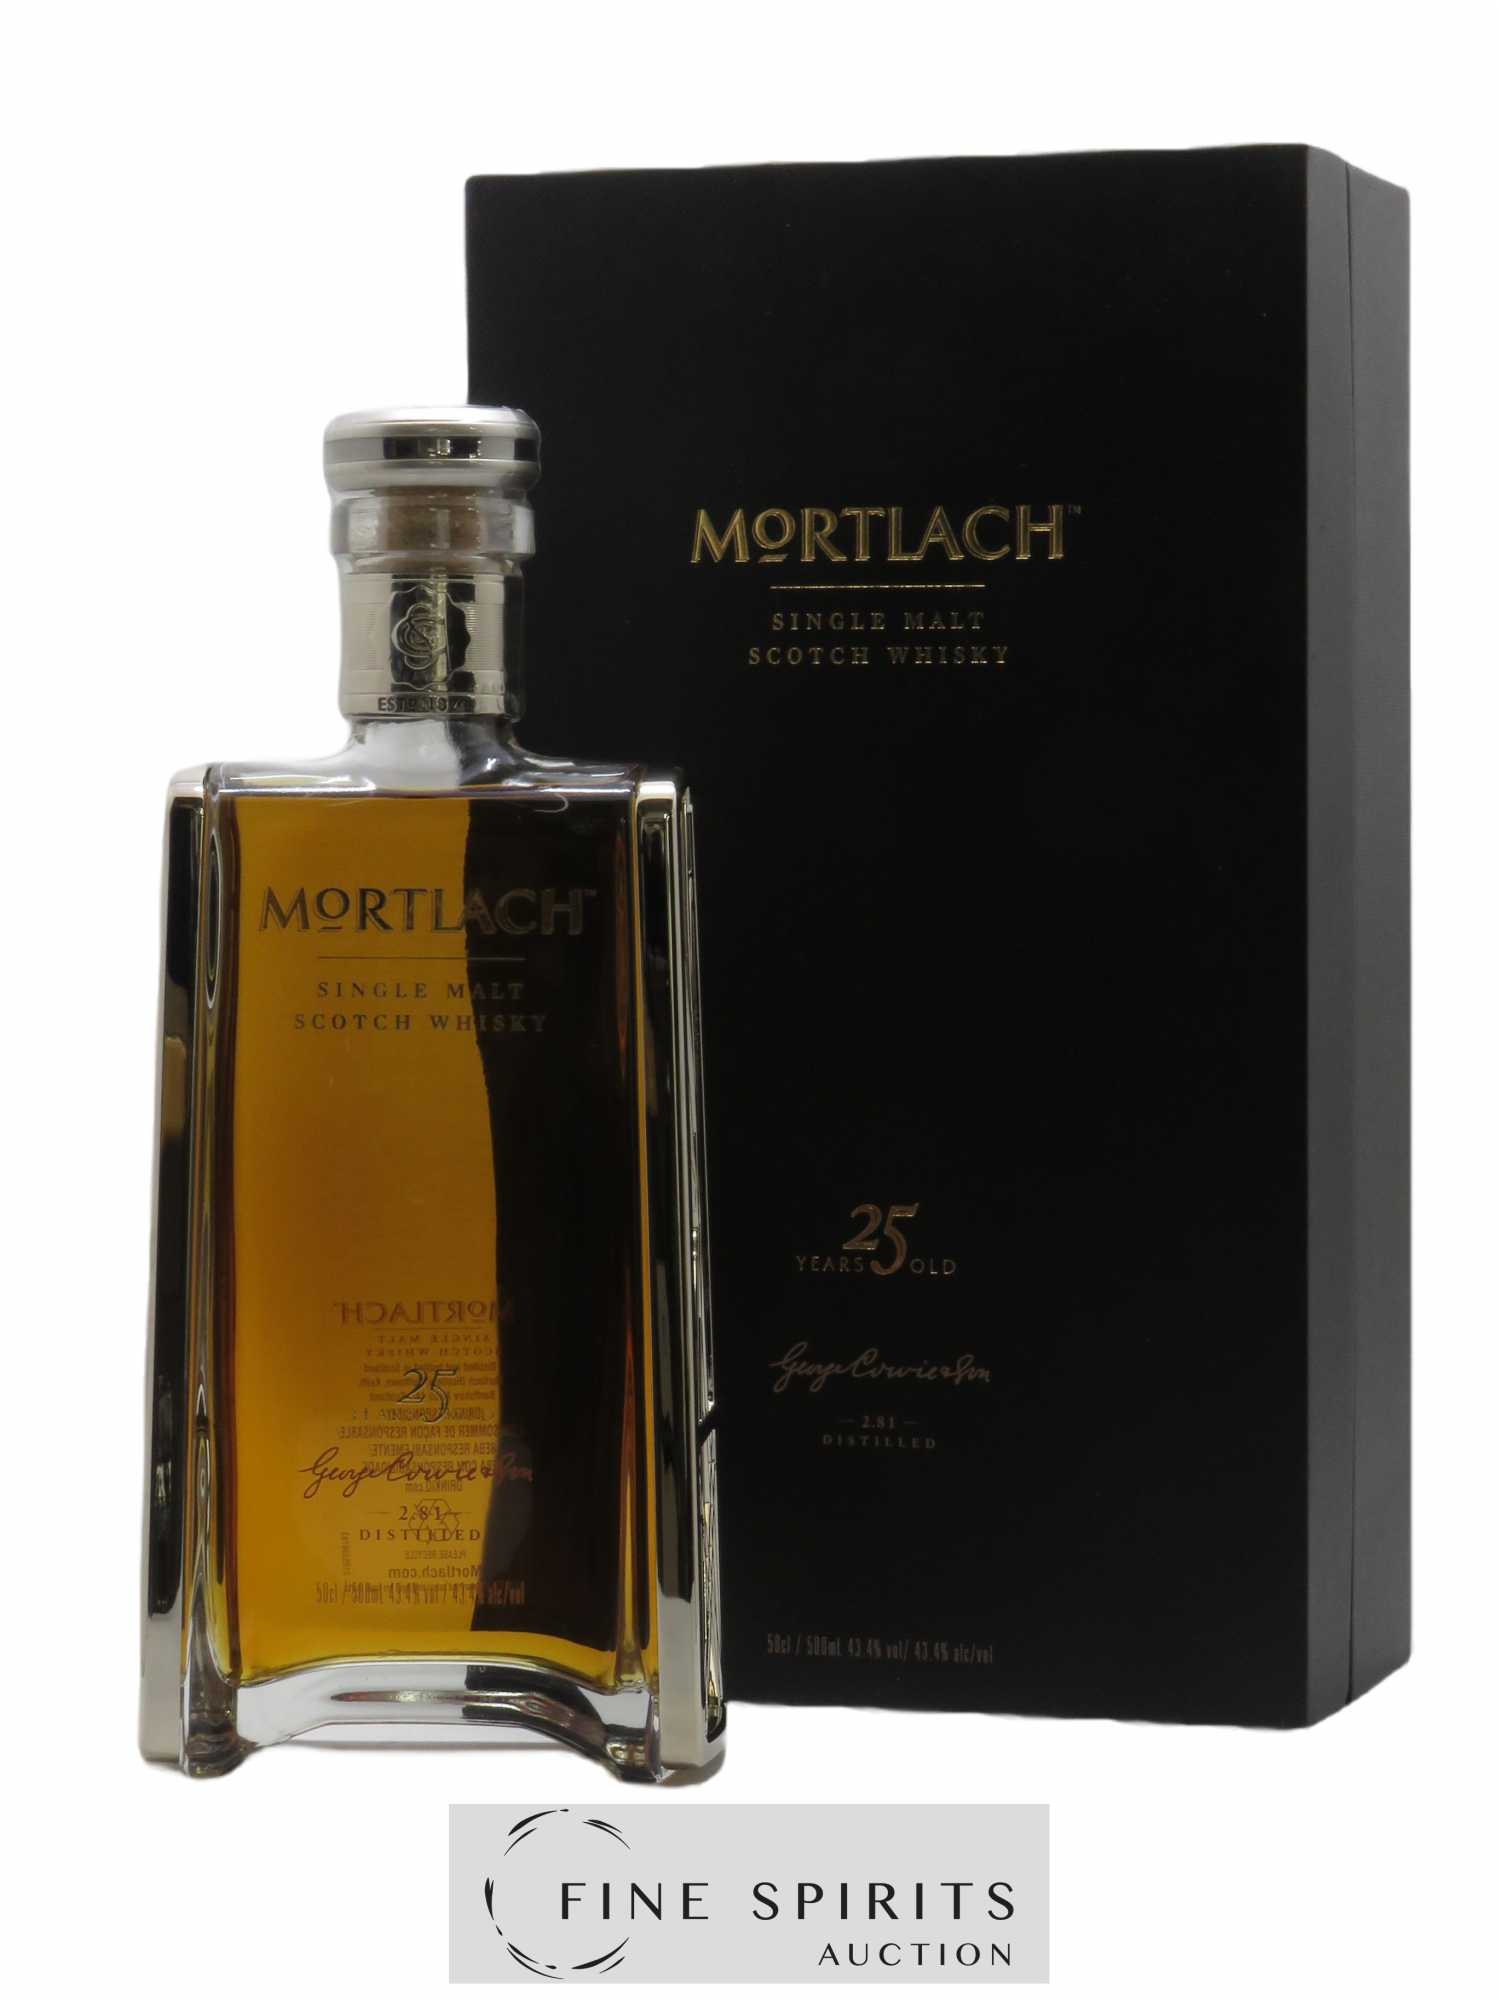 Mortlach 25 years Of. 2.81 Distilled